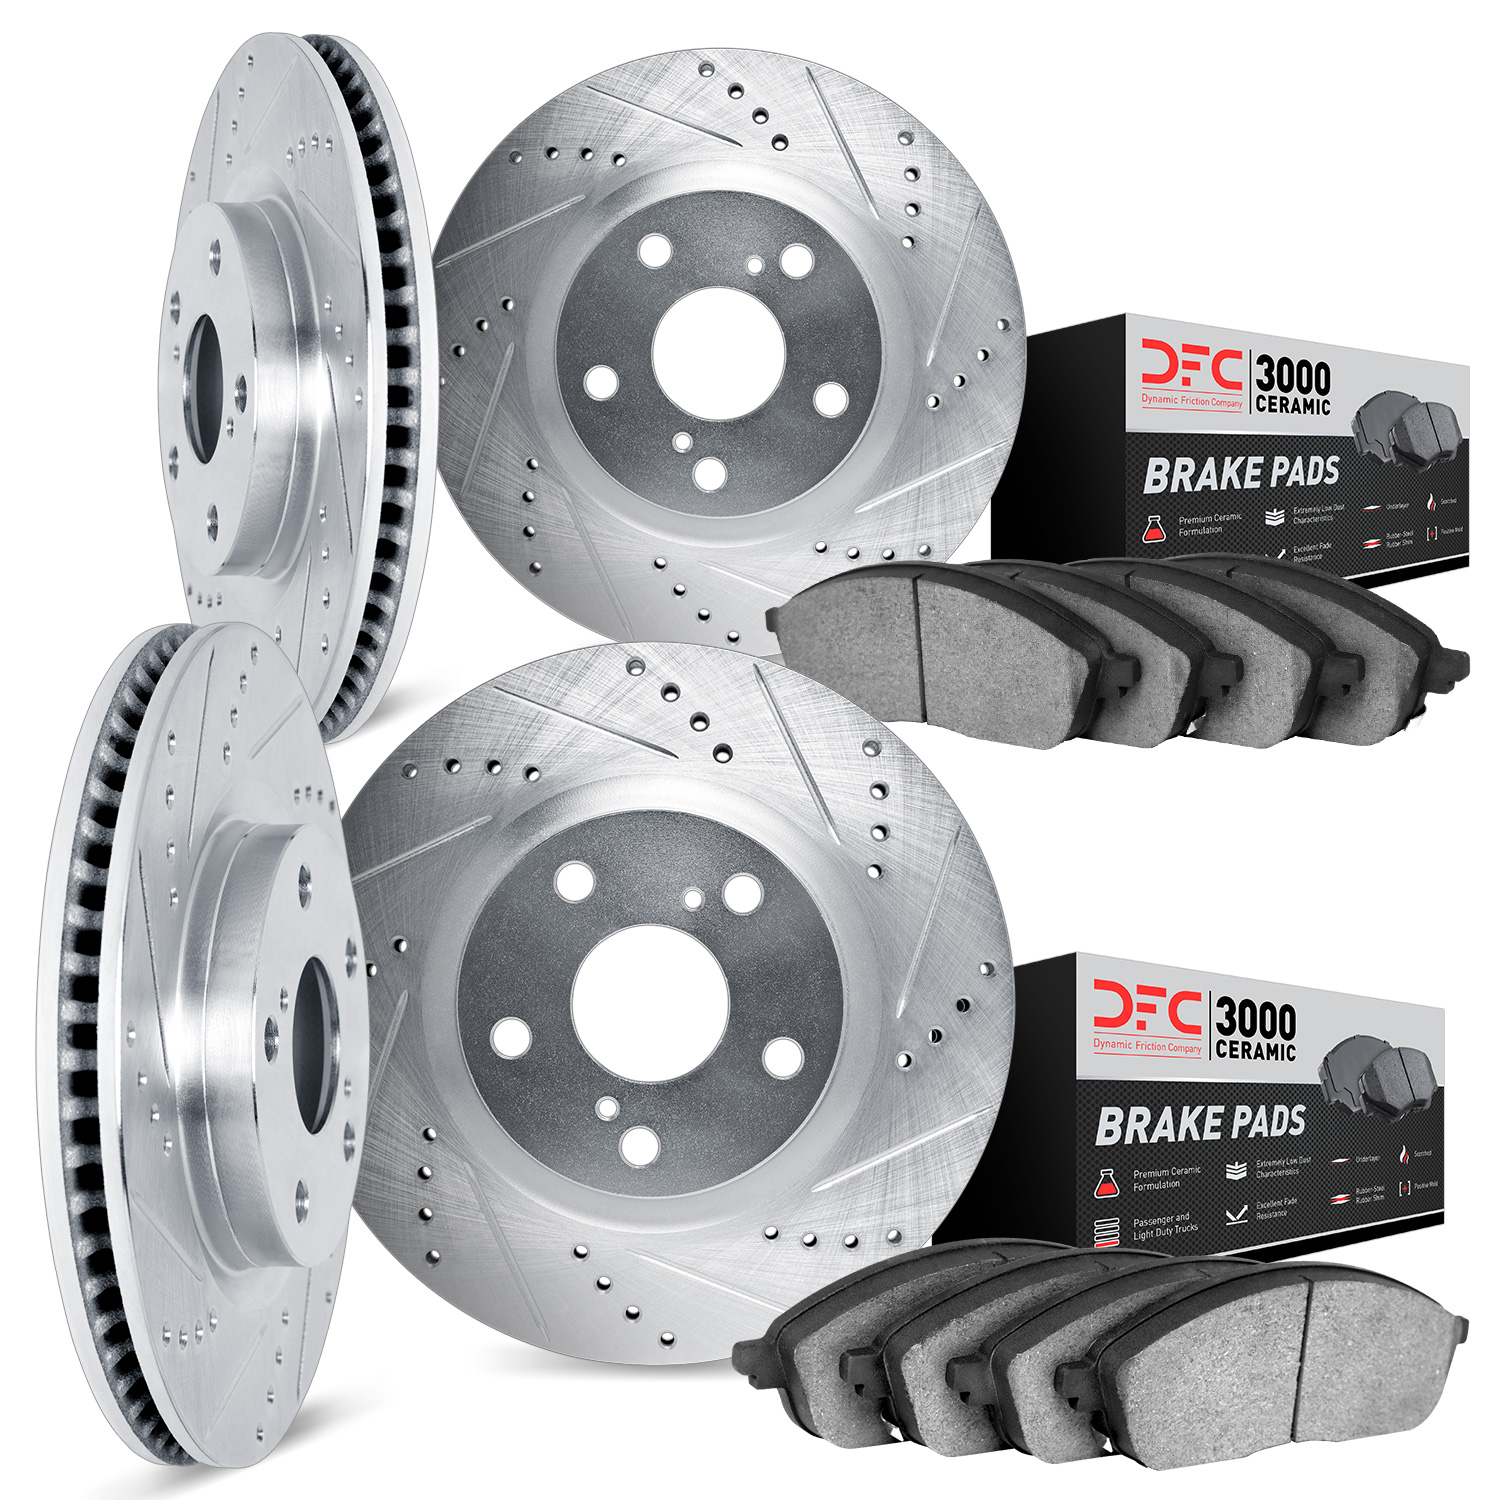 7304-75004 Drilled/Slotted Brake Rotor with 3000-Series Ceramic Brake Pads Kit [Silver], 1992-2000 Lexus/Toyota/Scion, Position: